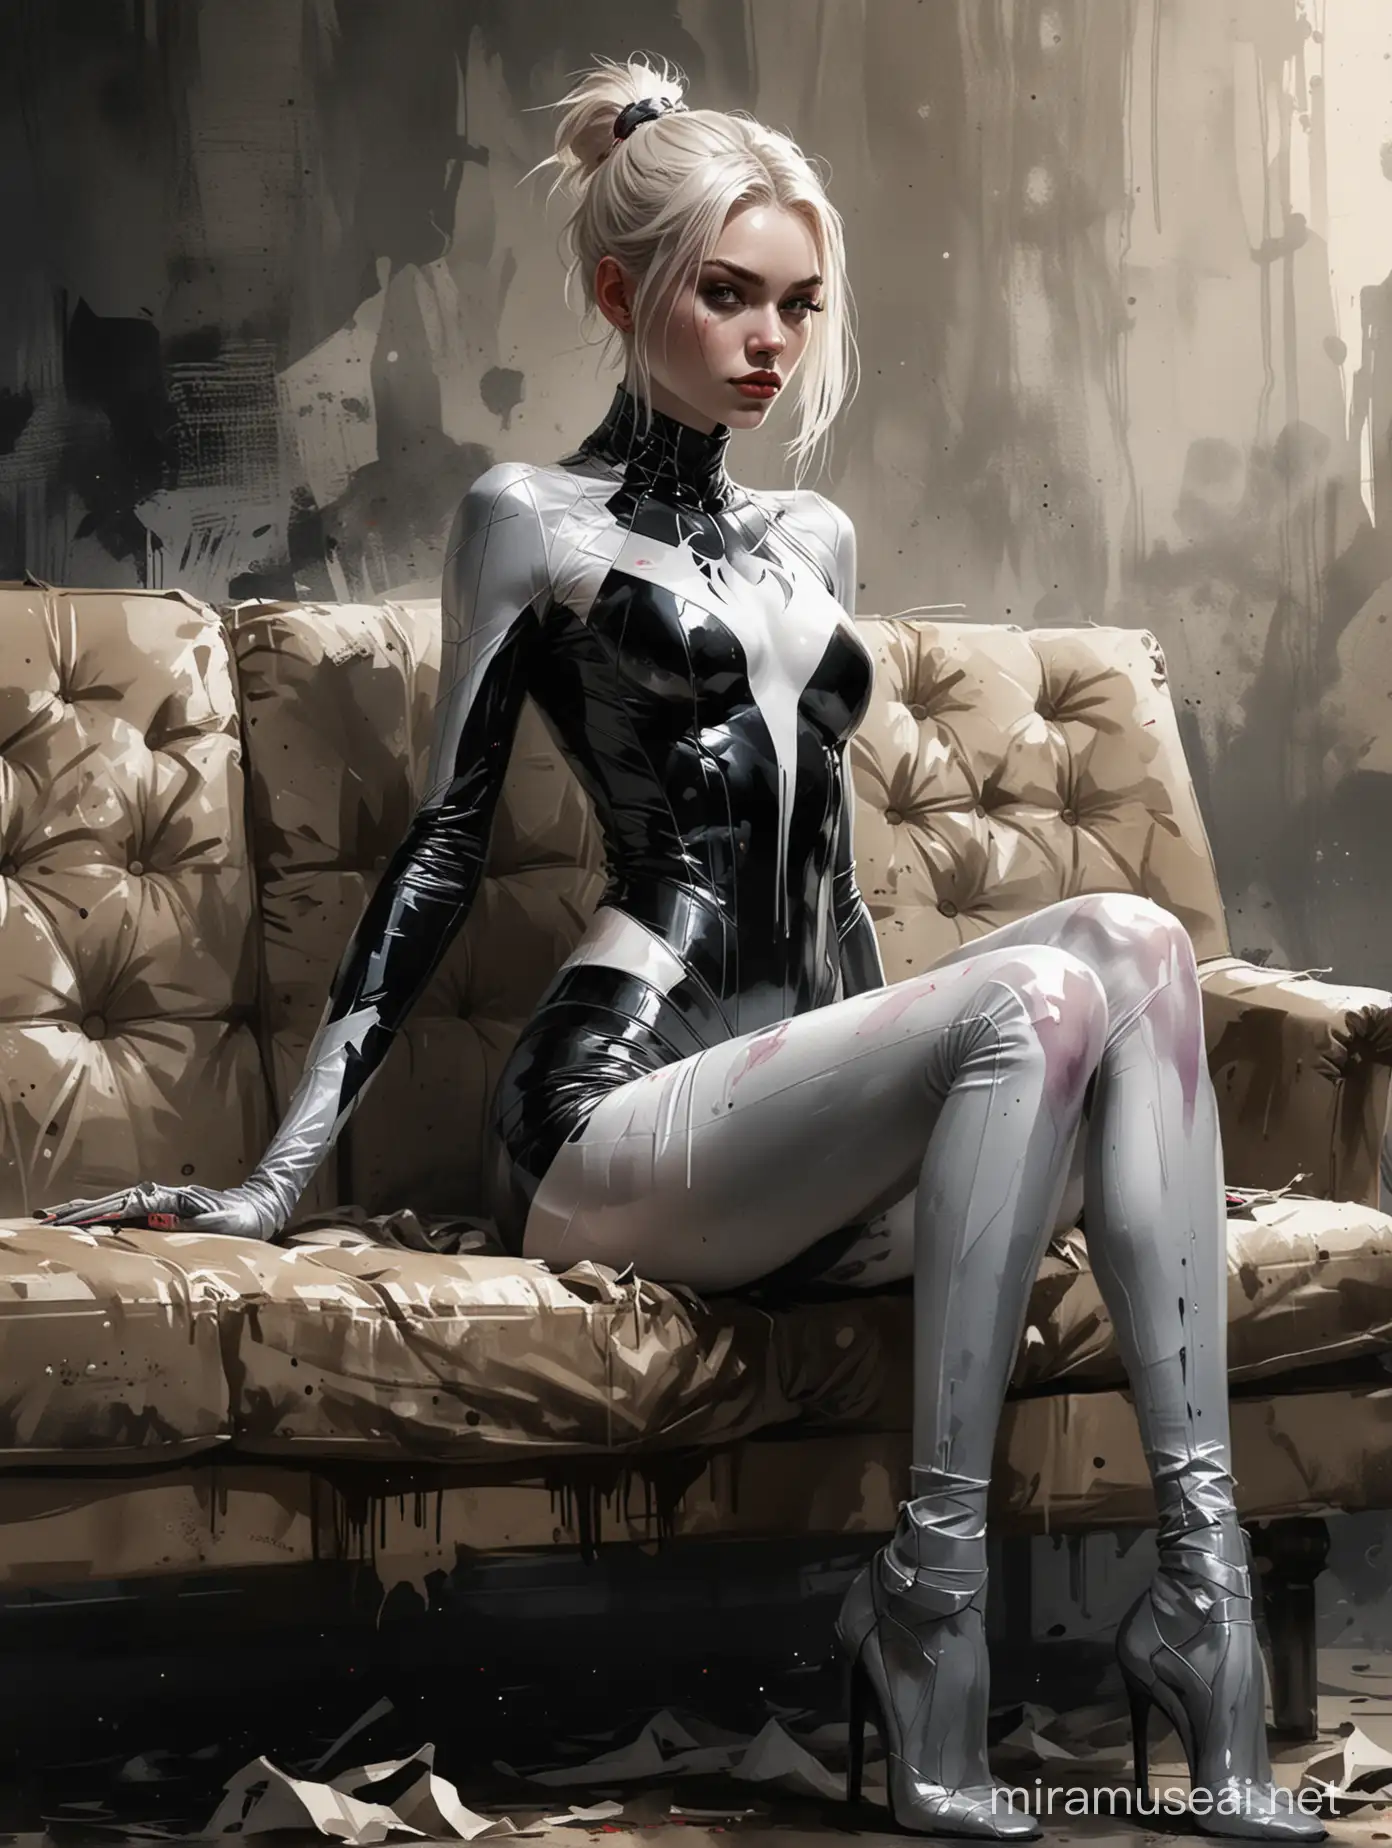 Alex Maleev illustration depicting Hunter Schafer wearing Spider-Gwen catsuit sitting on a rotting couch seductive pose, chiaroscuro, dramatic lighting, messy watercolor, no distortion, gray palette, insanely high detail, very high quality, seen from below, low angle view, forced perspective
